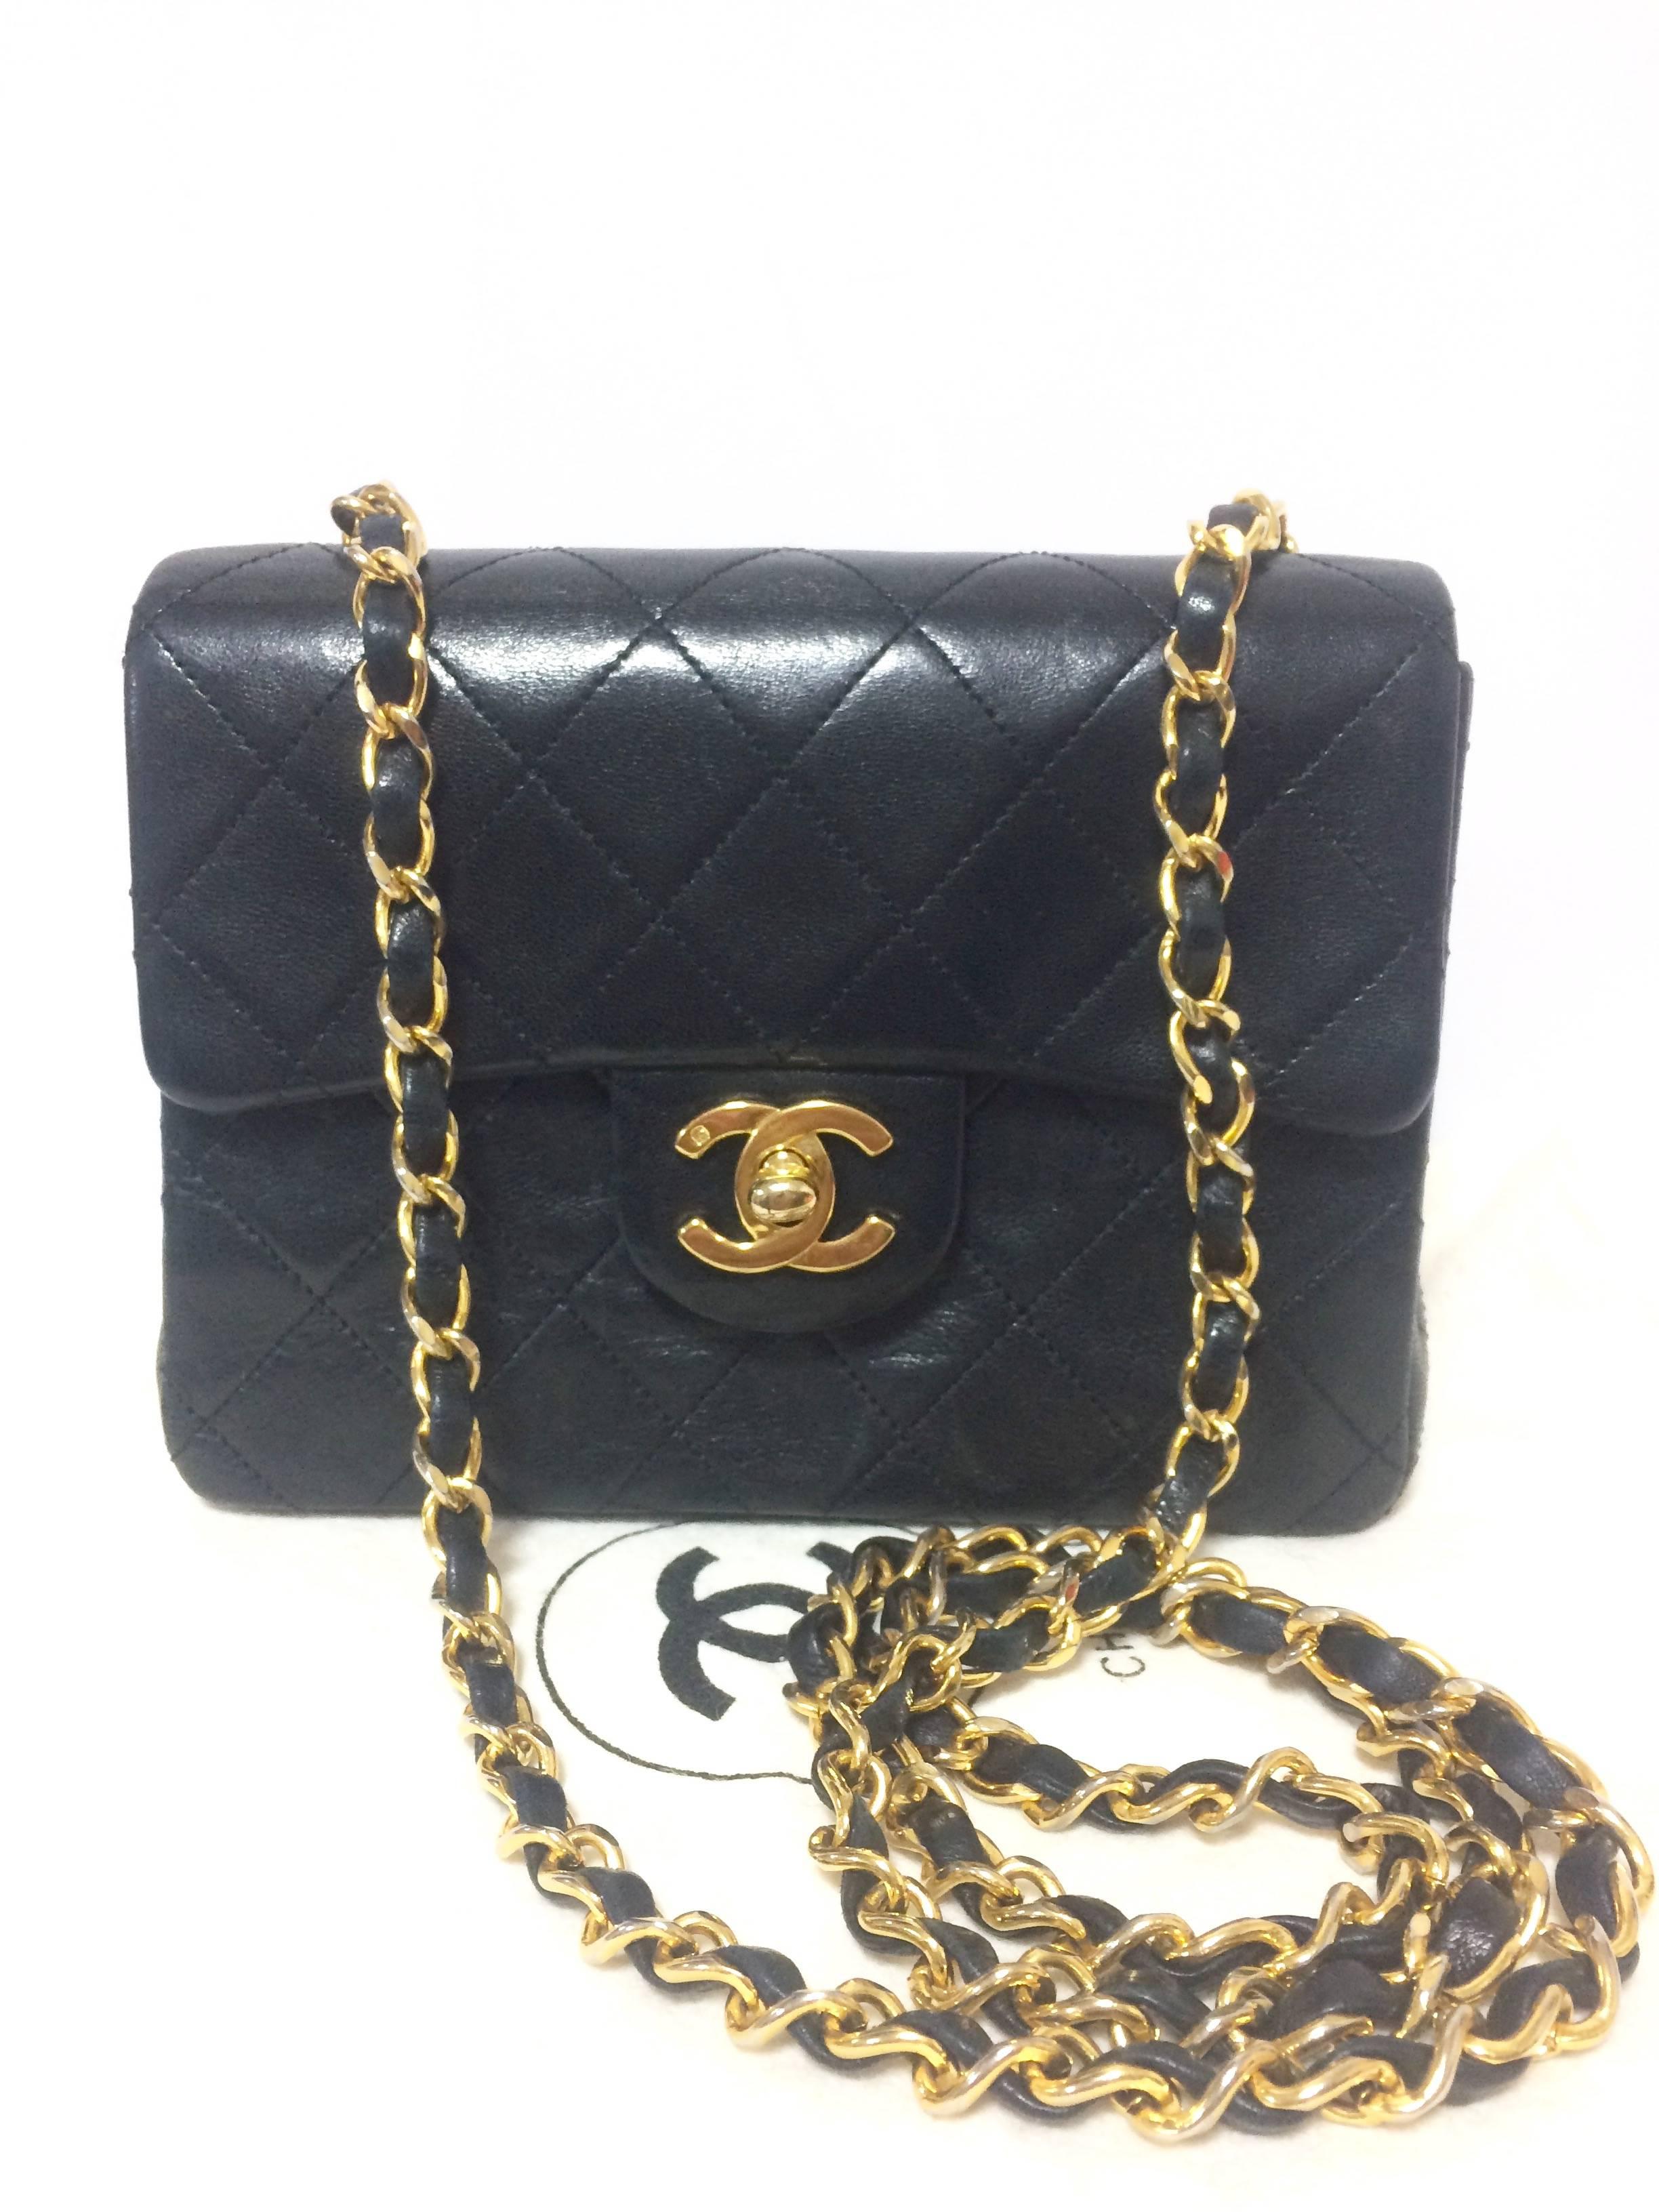 1990s. Vintage CHANEL black lamb leather flap chain shoulder bag, classic 2.55 mini purse with gold tone CC closure.

Introducing one of the most popular pieces from CHANEL back in the early 90's, vintage Chanel classic black lambskin 2.55 mini